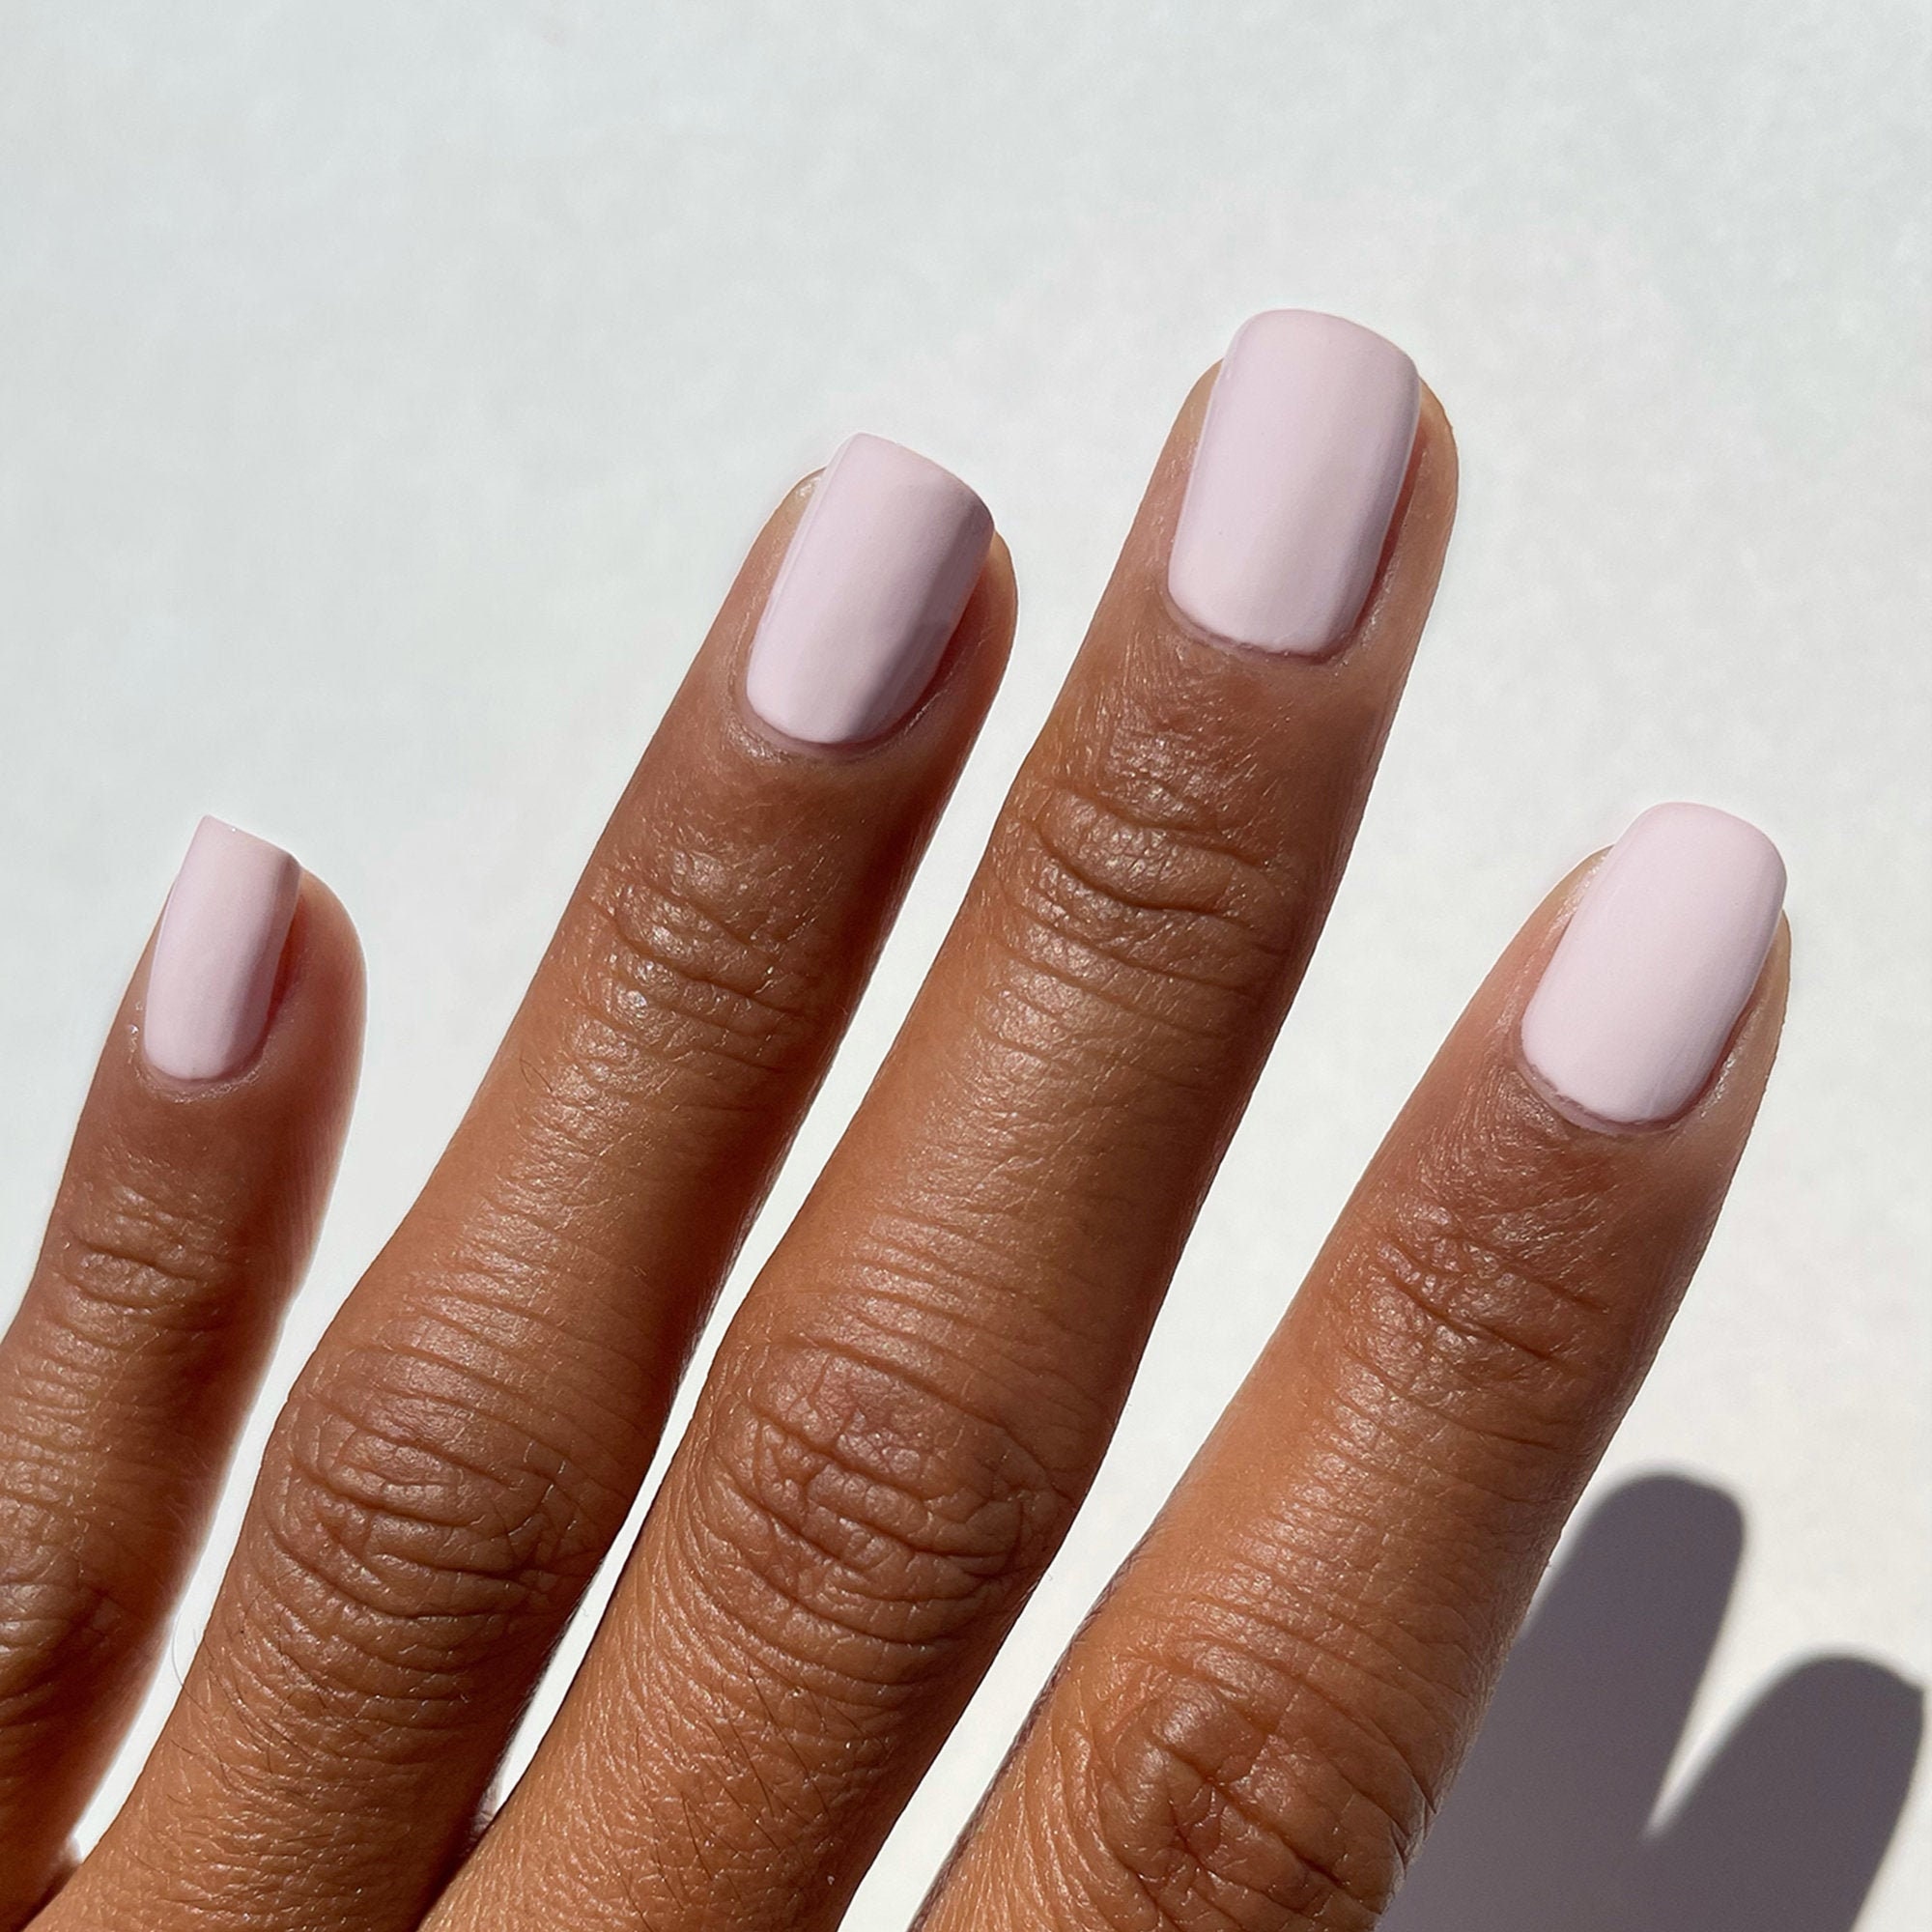 My obsession with pale pink nail polish continues : r/RedditLaqueristas